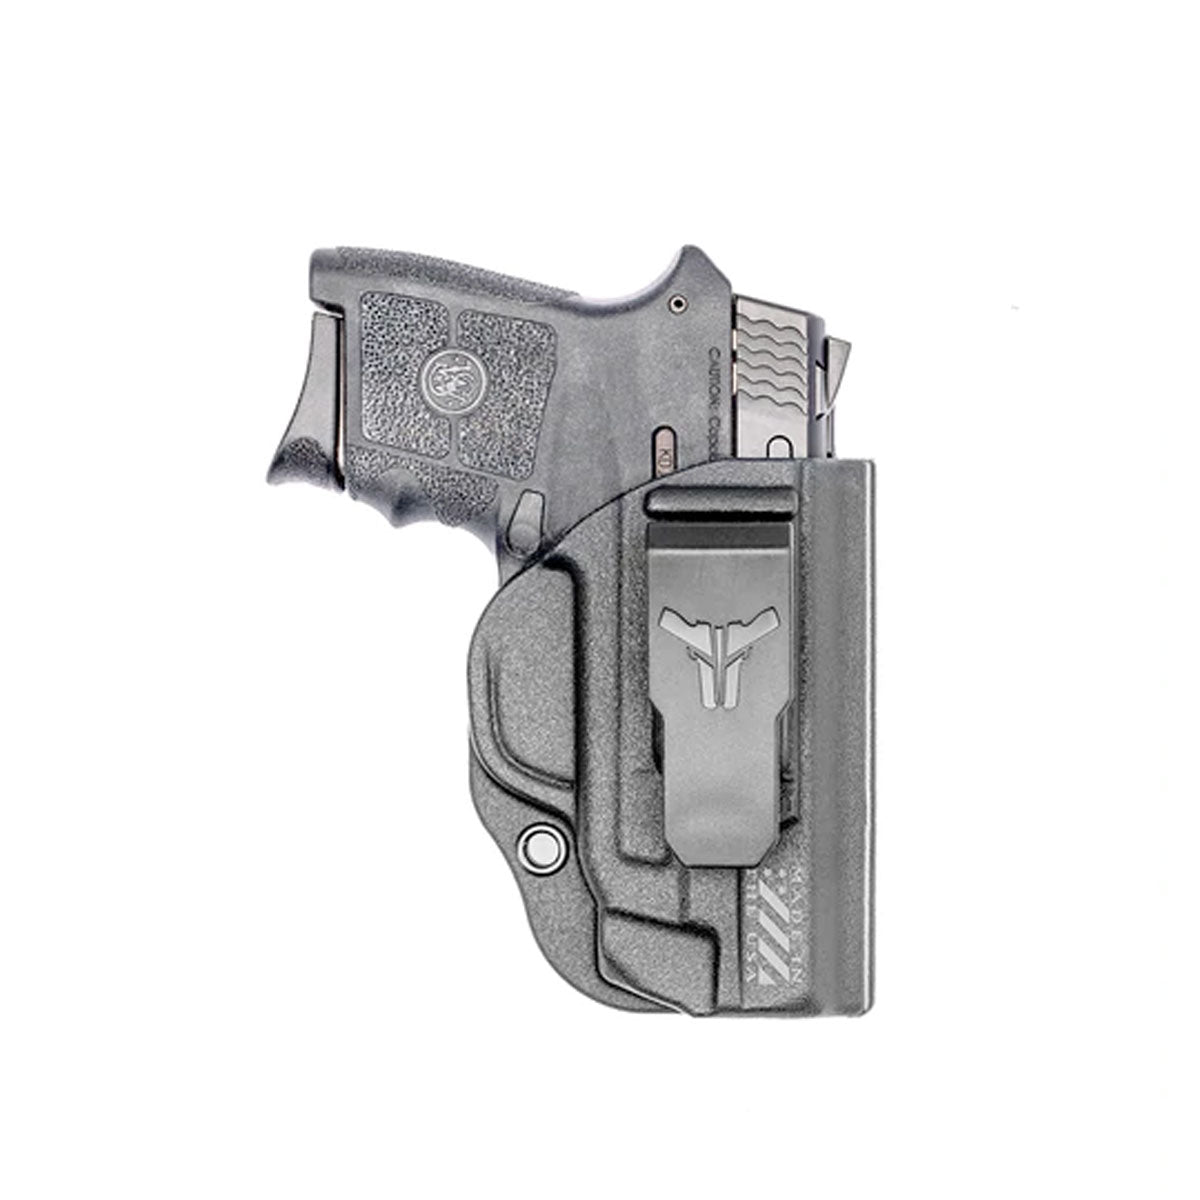 Blade-Tech Klipt IWB Holster Black Right Hand Only Holsters Blade-Tech Holsters S&W .380 Guard w/ Laser Tactical Gear Supplier Tactical Distributors Australia